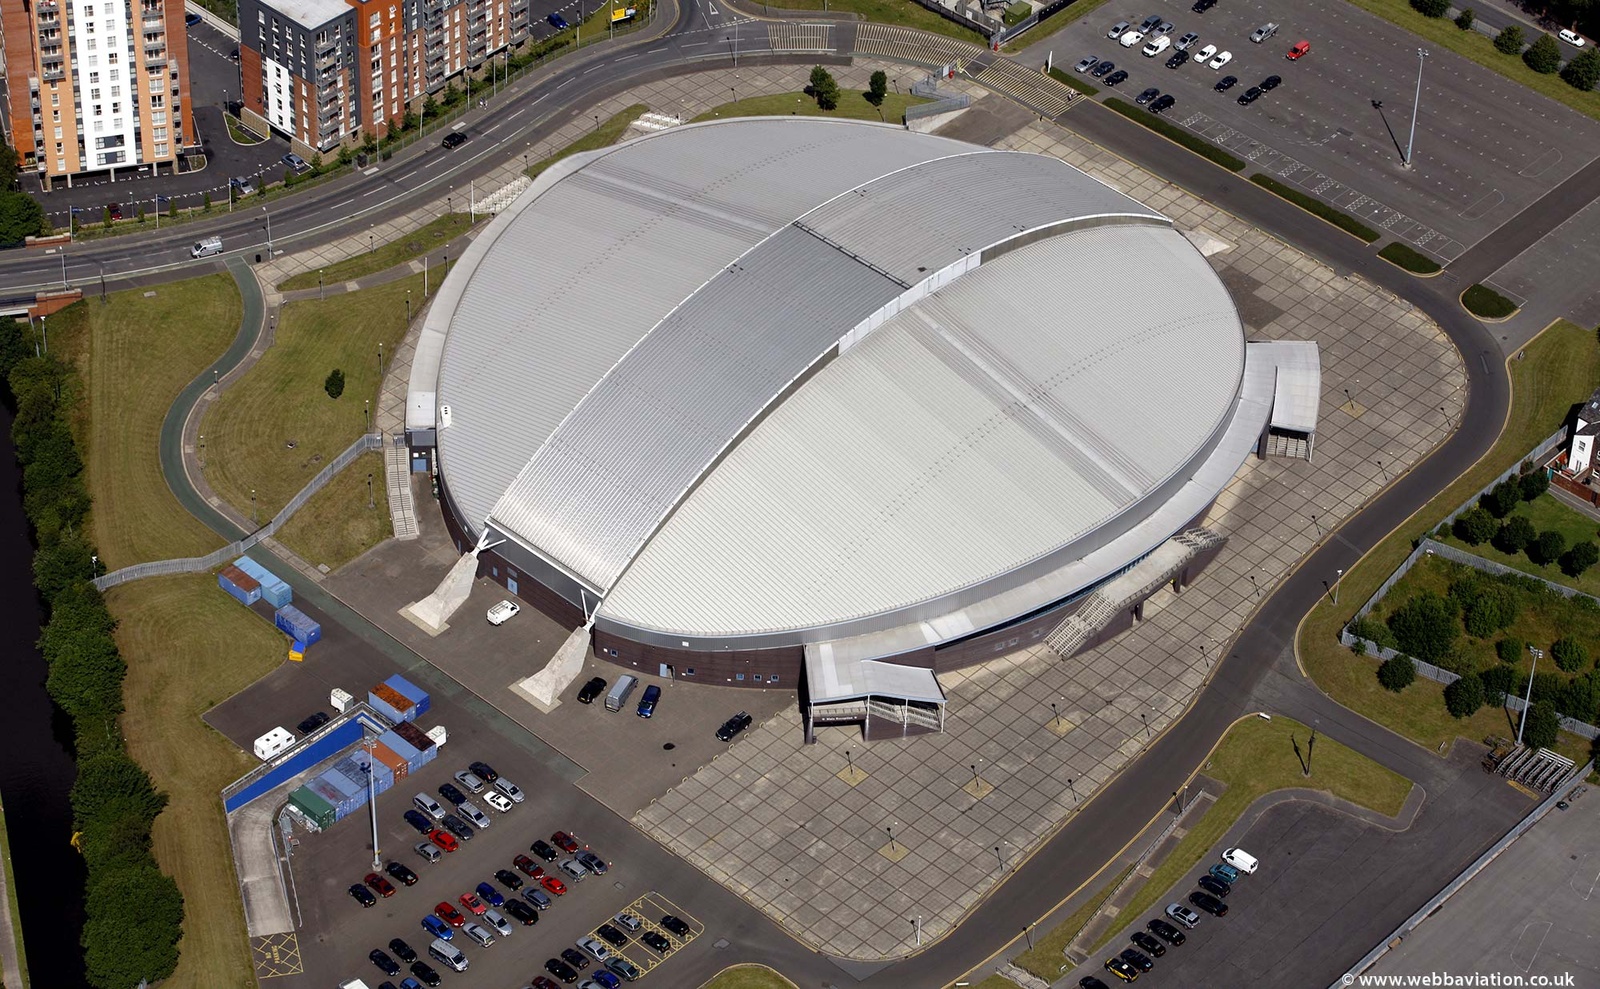 Manchester Velodrome from the air